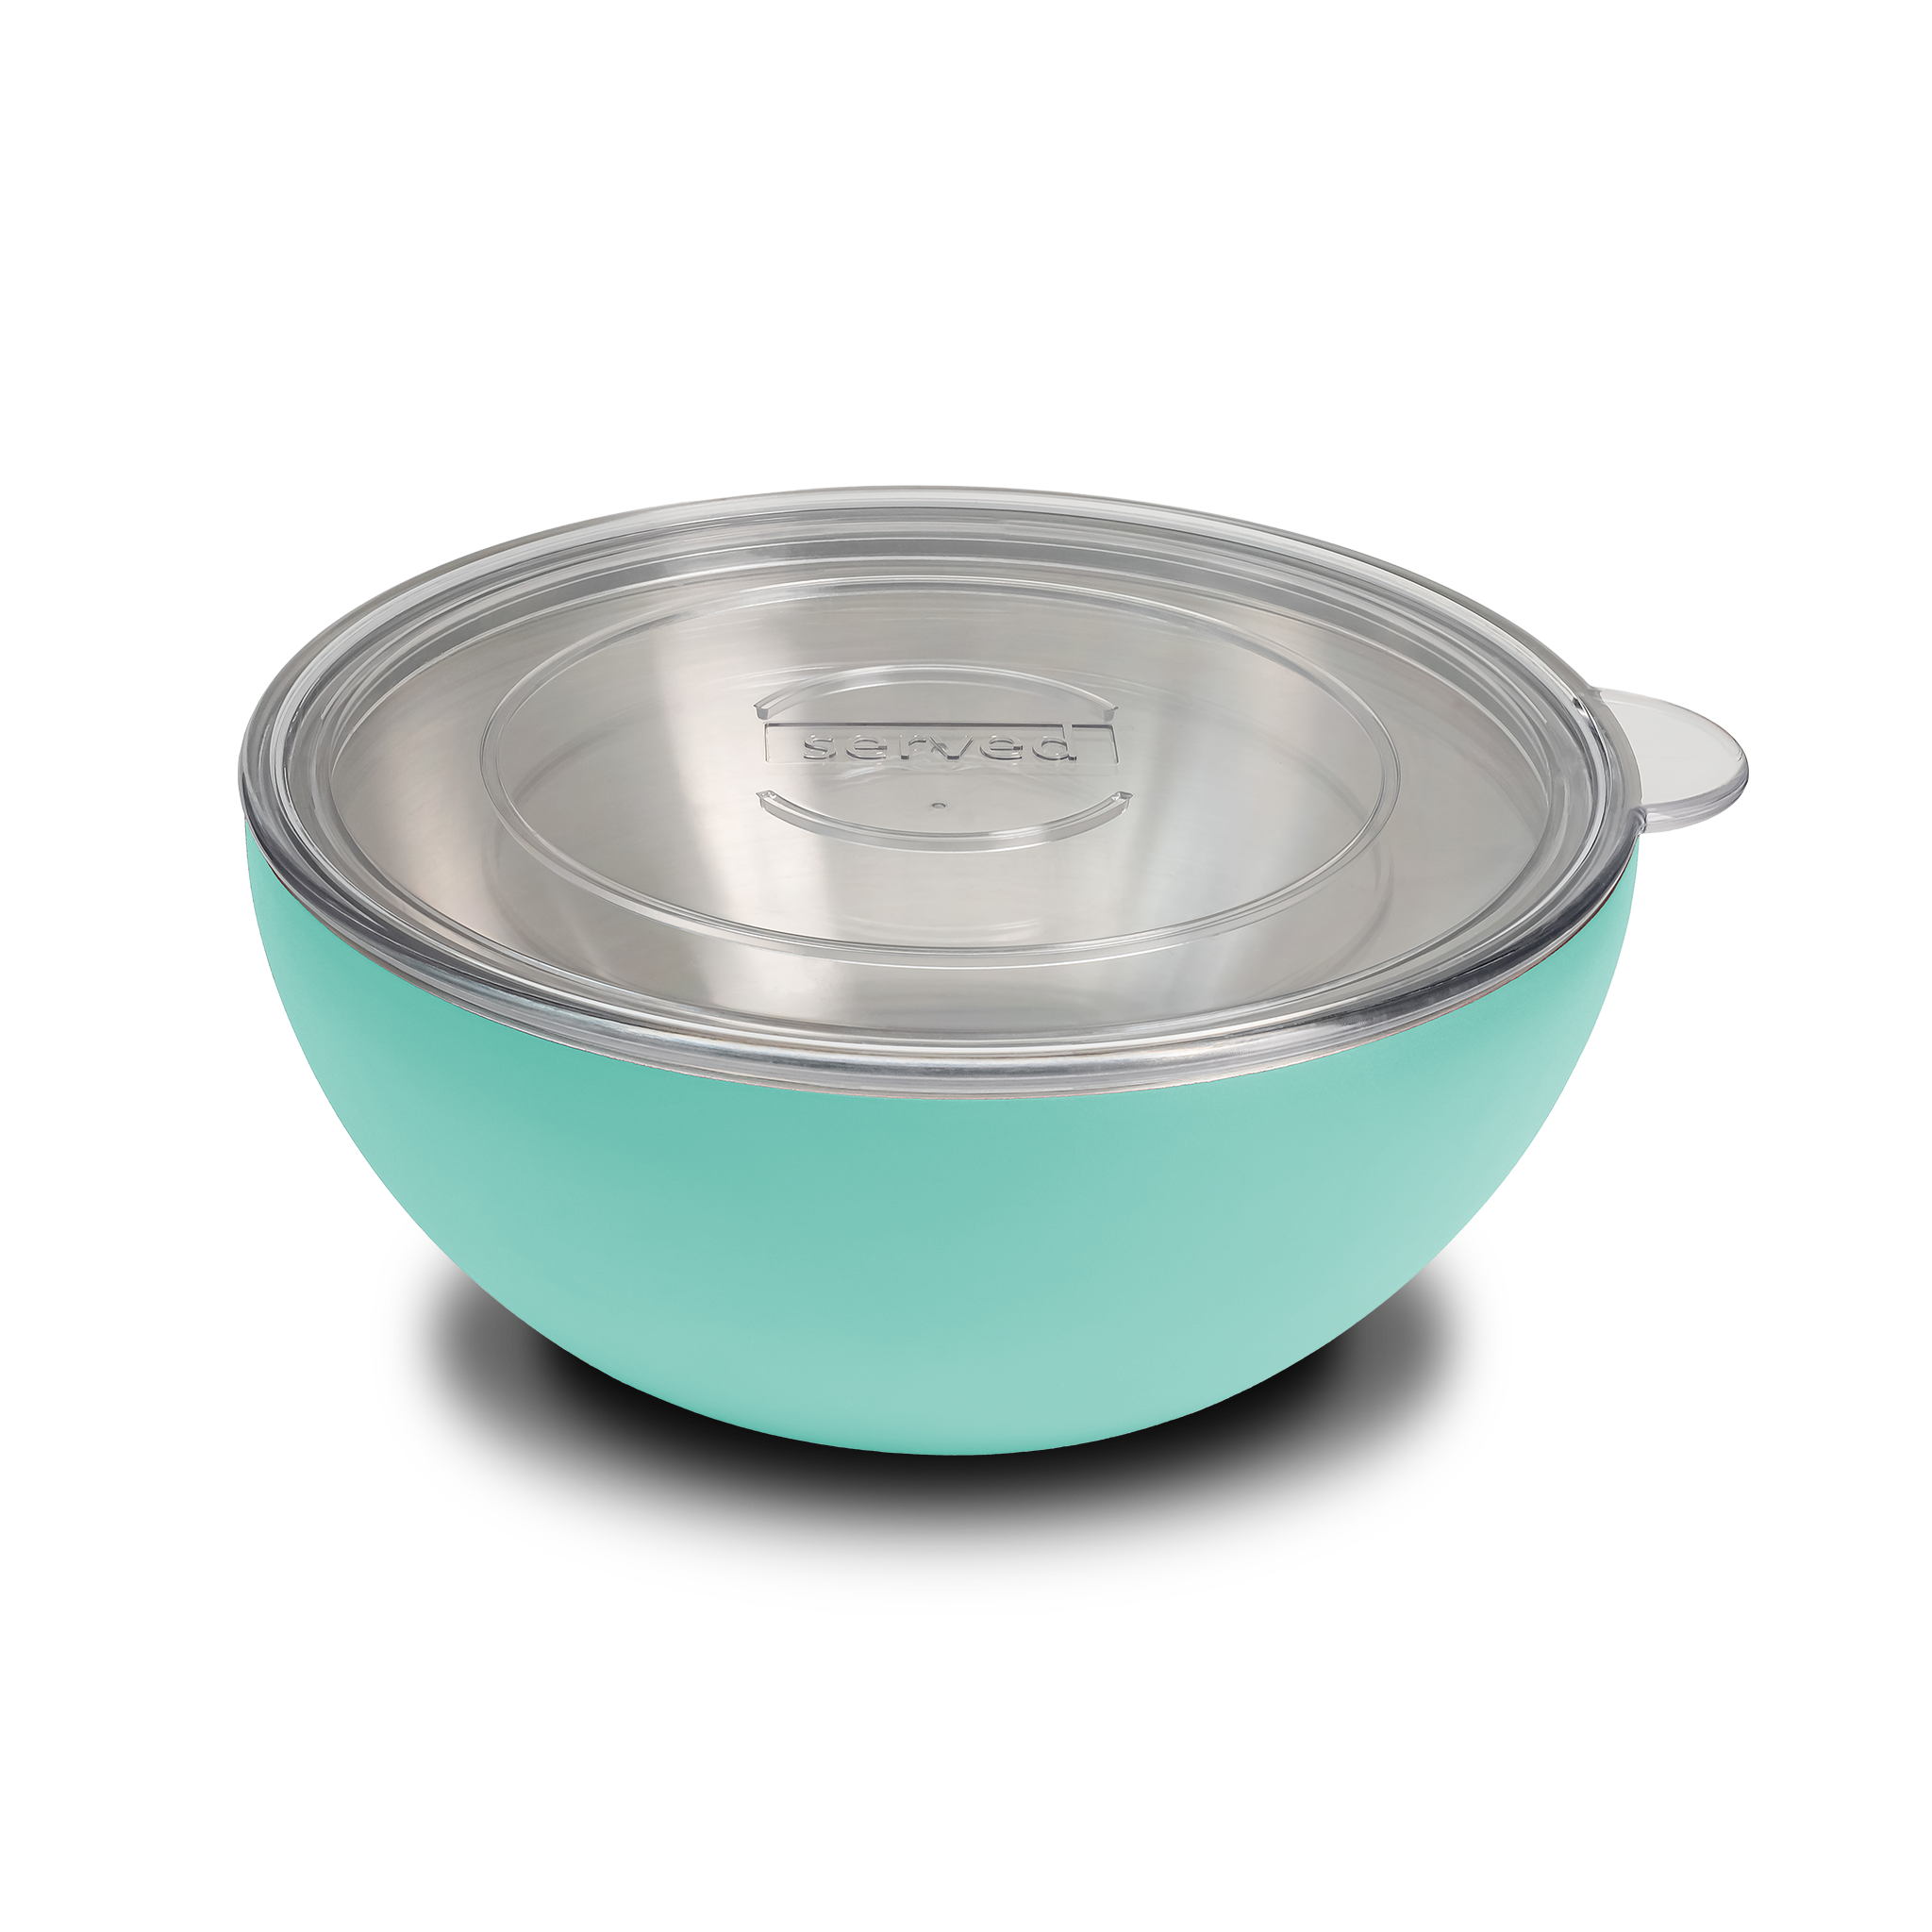 served Vacuum-Insulated Large Serving Bowl (2.5Q) - Strawberry